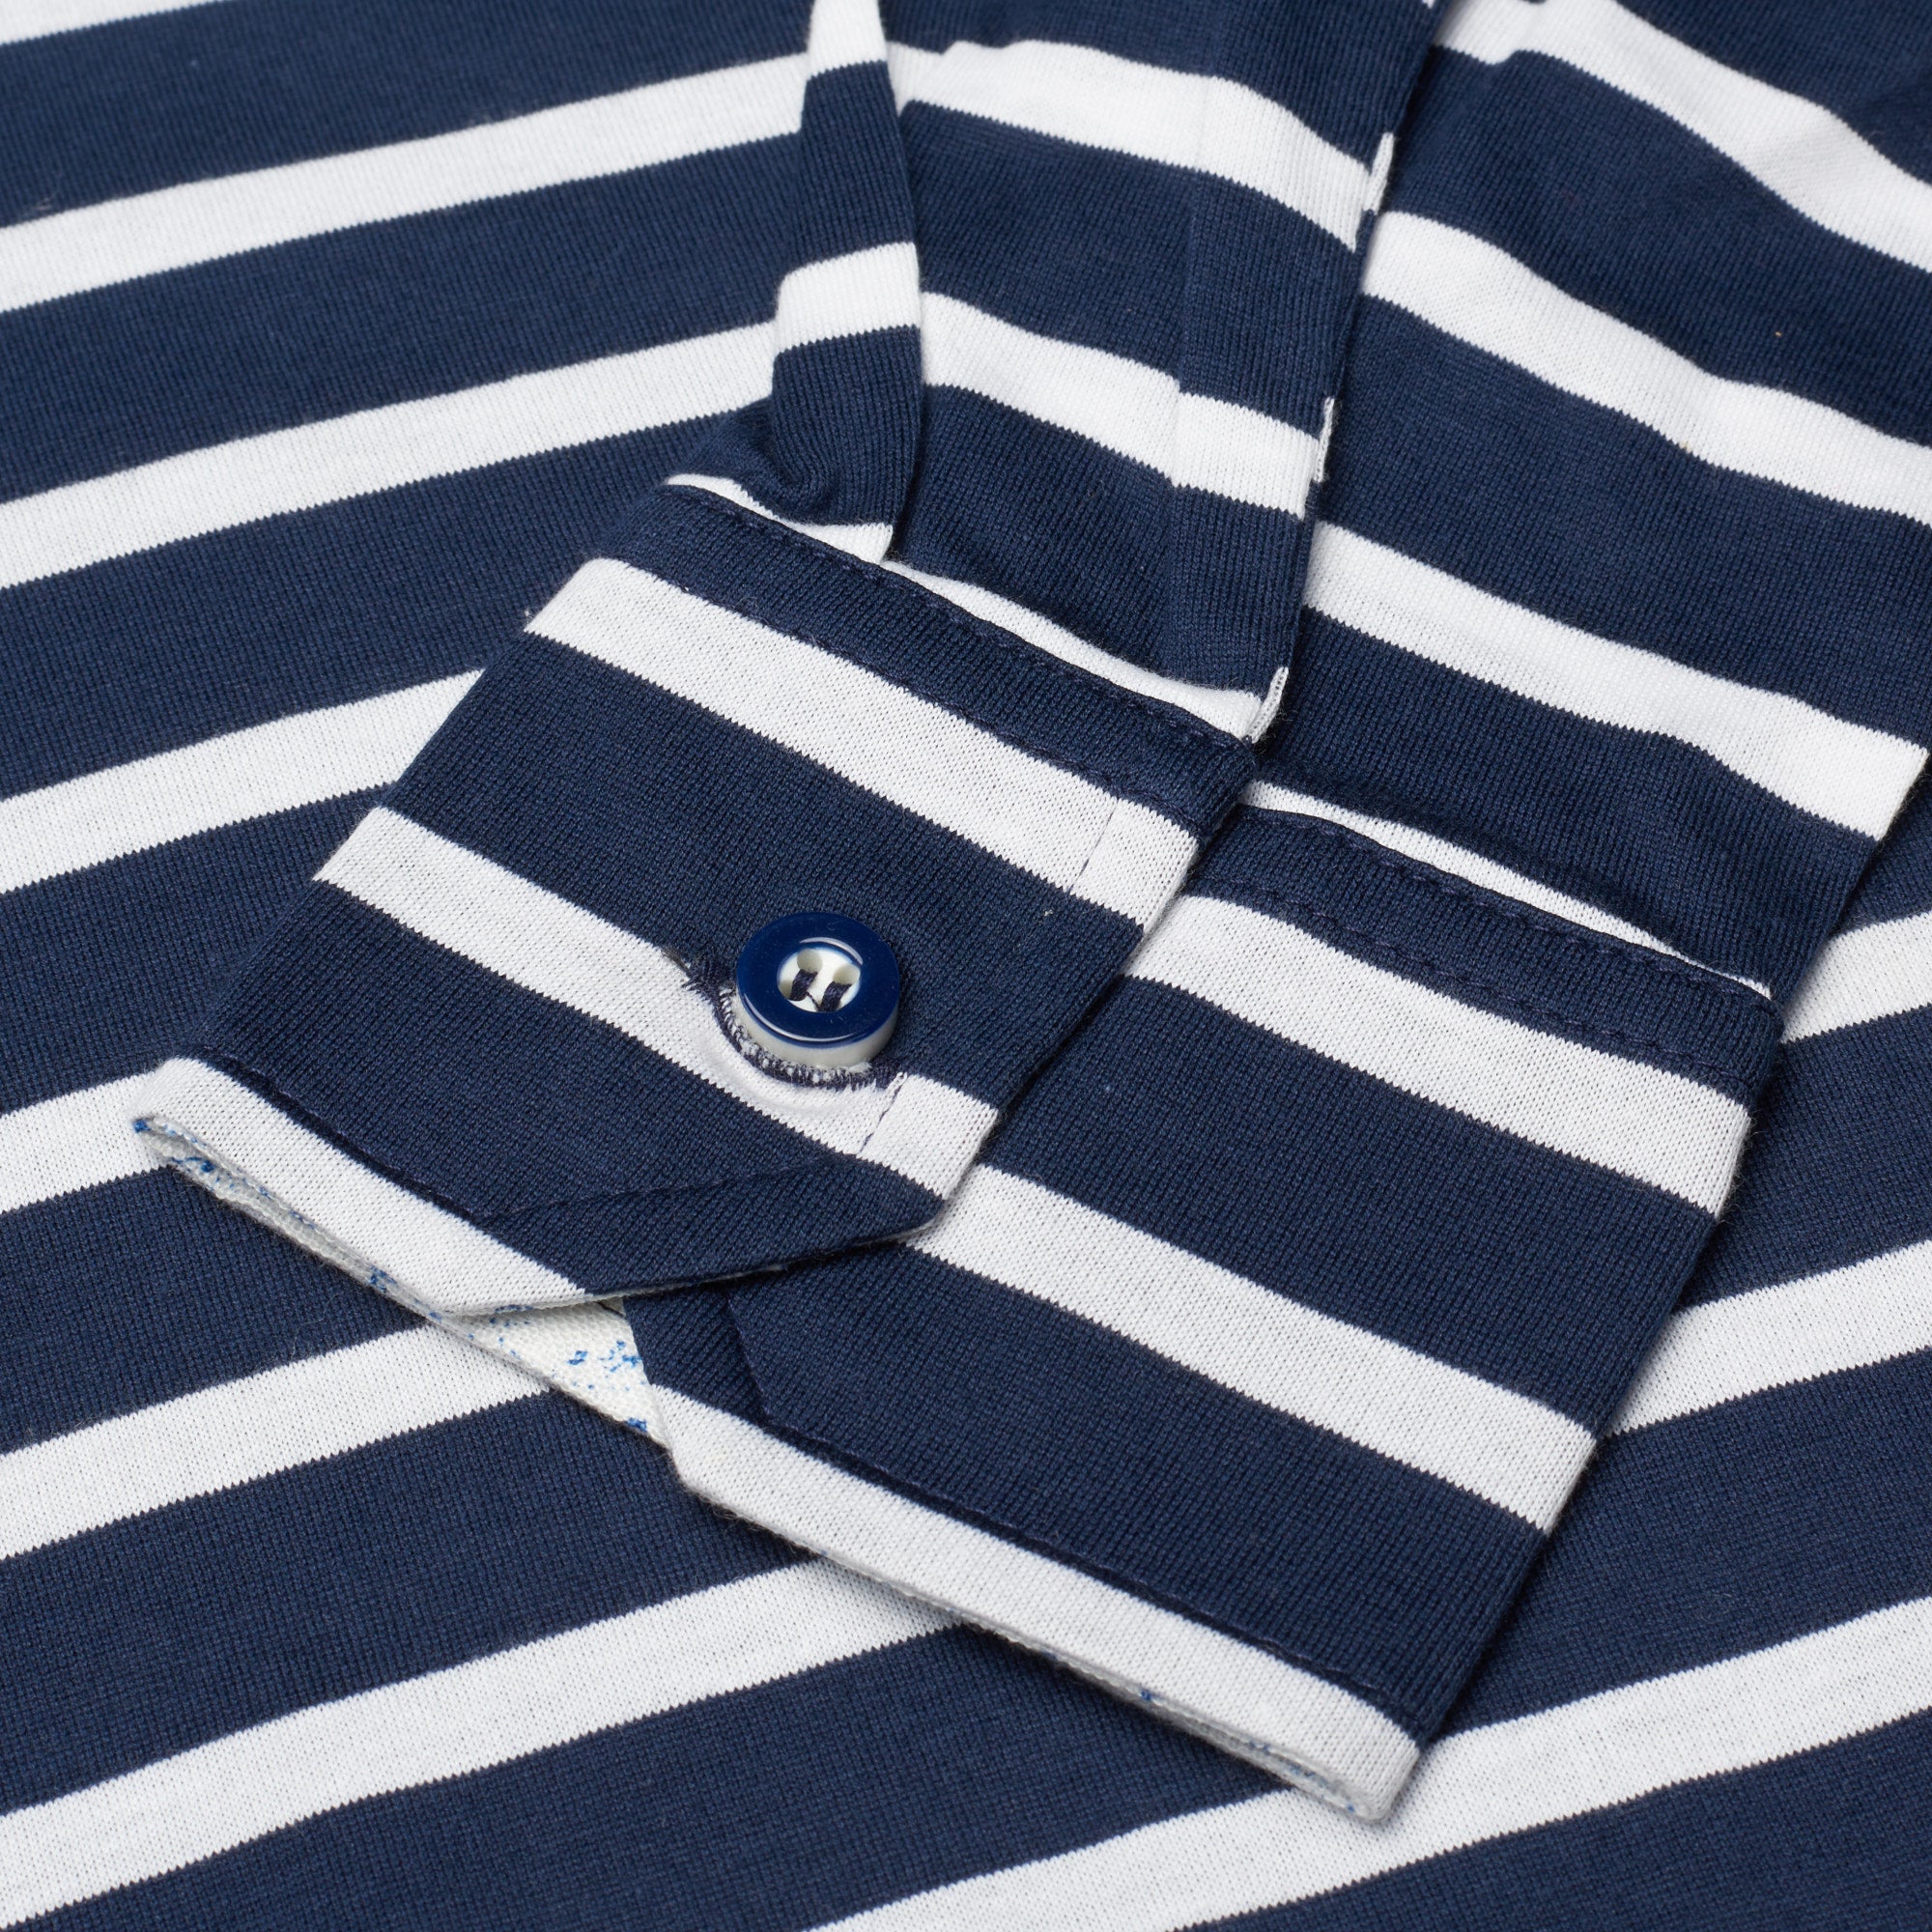 FEDELI "Partenope" Navy Blue Striped Sea Island Cotton Jersey Polo Shirt 50 NEW US M